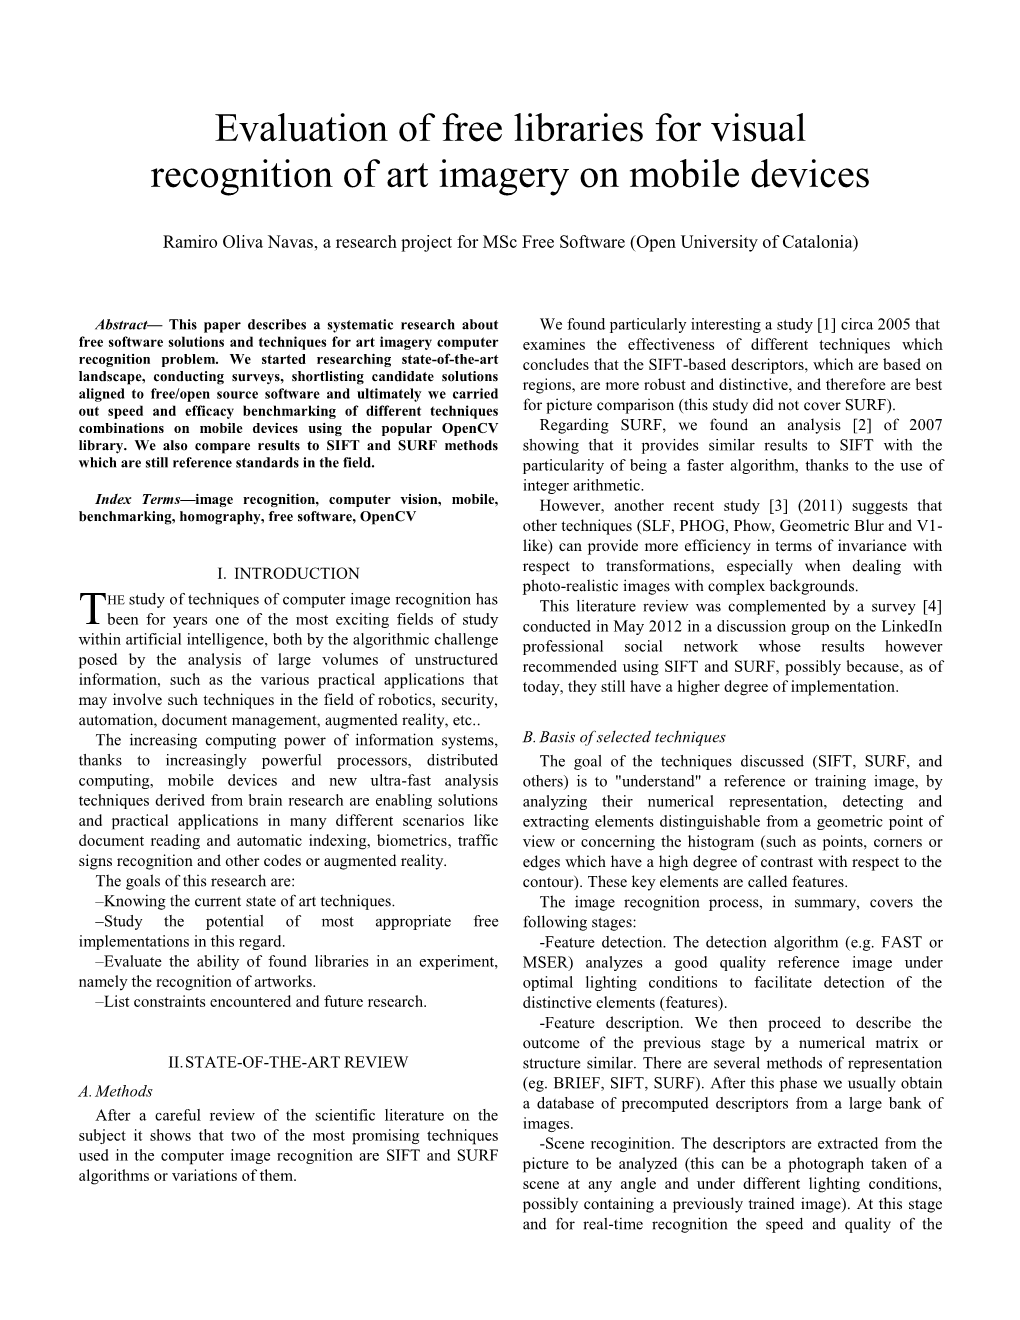 Evaluation of Free Libraries for Visual Recognition of Art Imagery on Mobile Devices